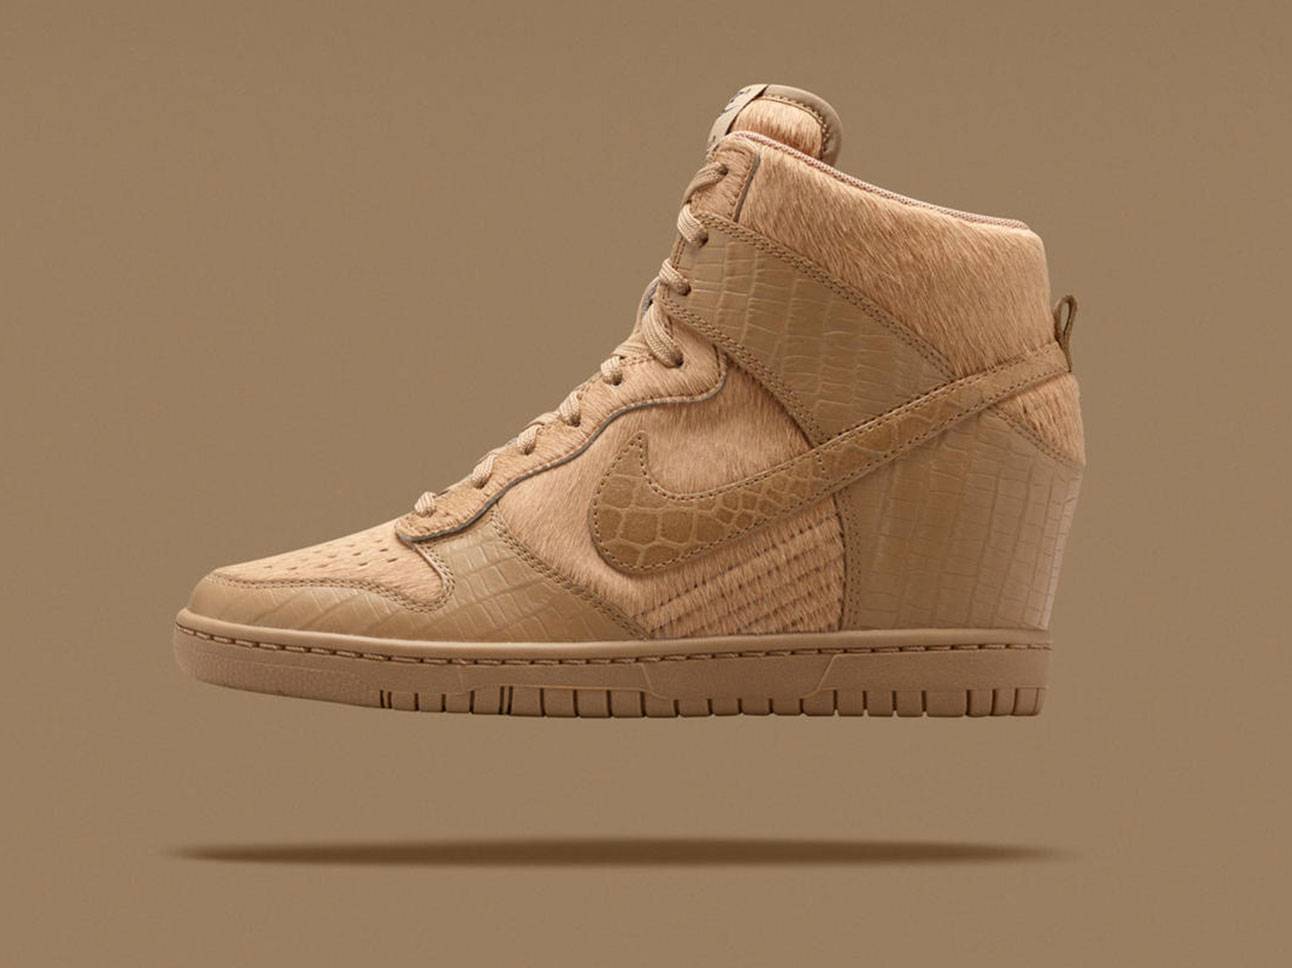 UNDERCOVER 2021 Fall Winter collection Nike Dunk High 首曝光！熱搶款加入潑墨點綴